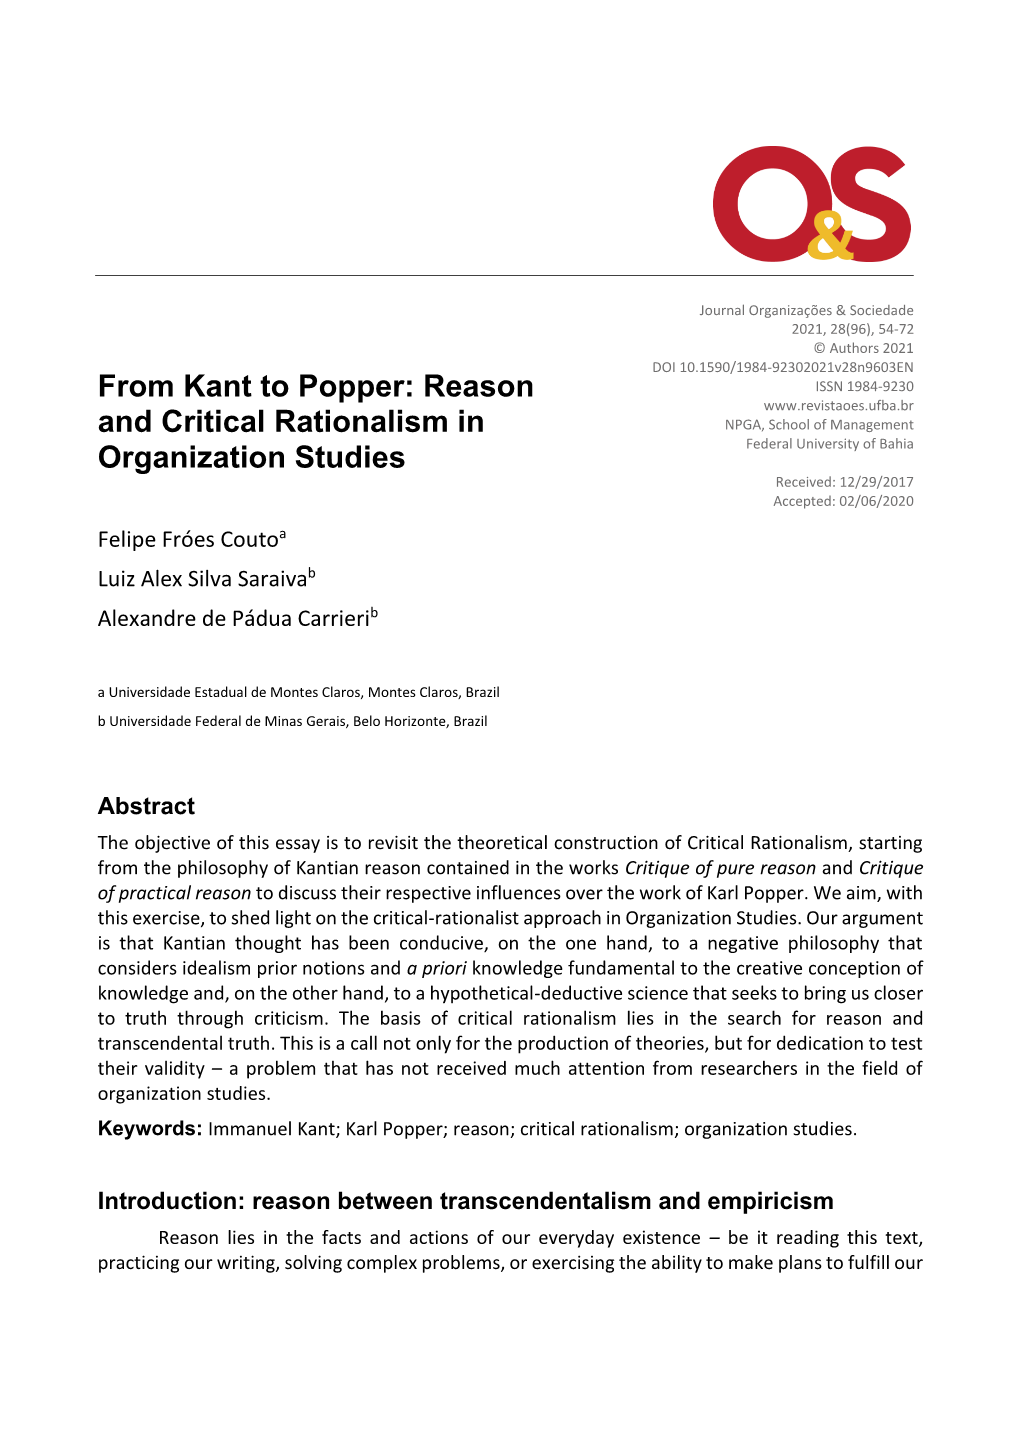 From Kant to Popper: Reason and Critical Rationalism in Organization